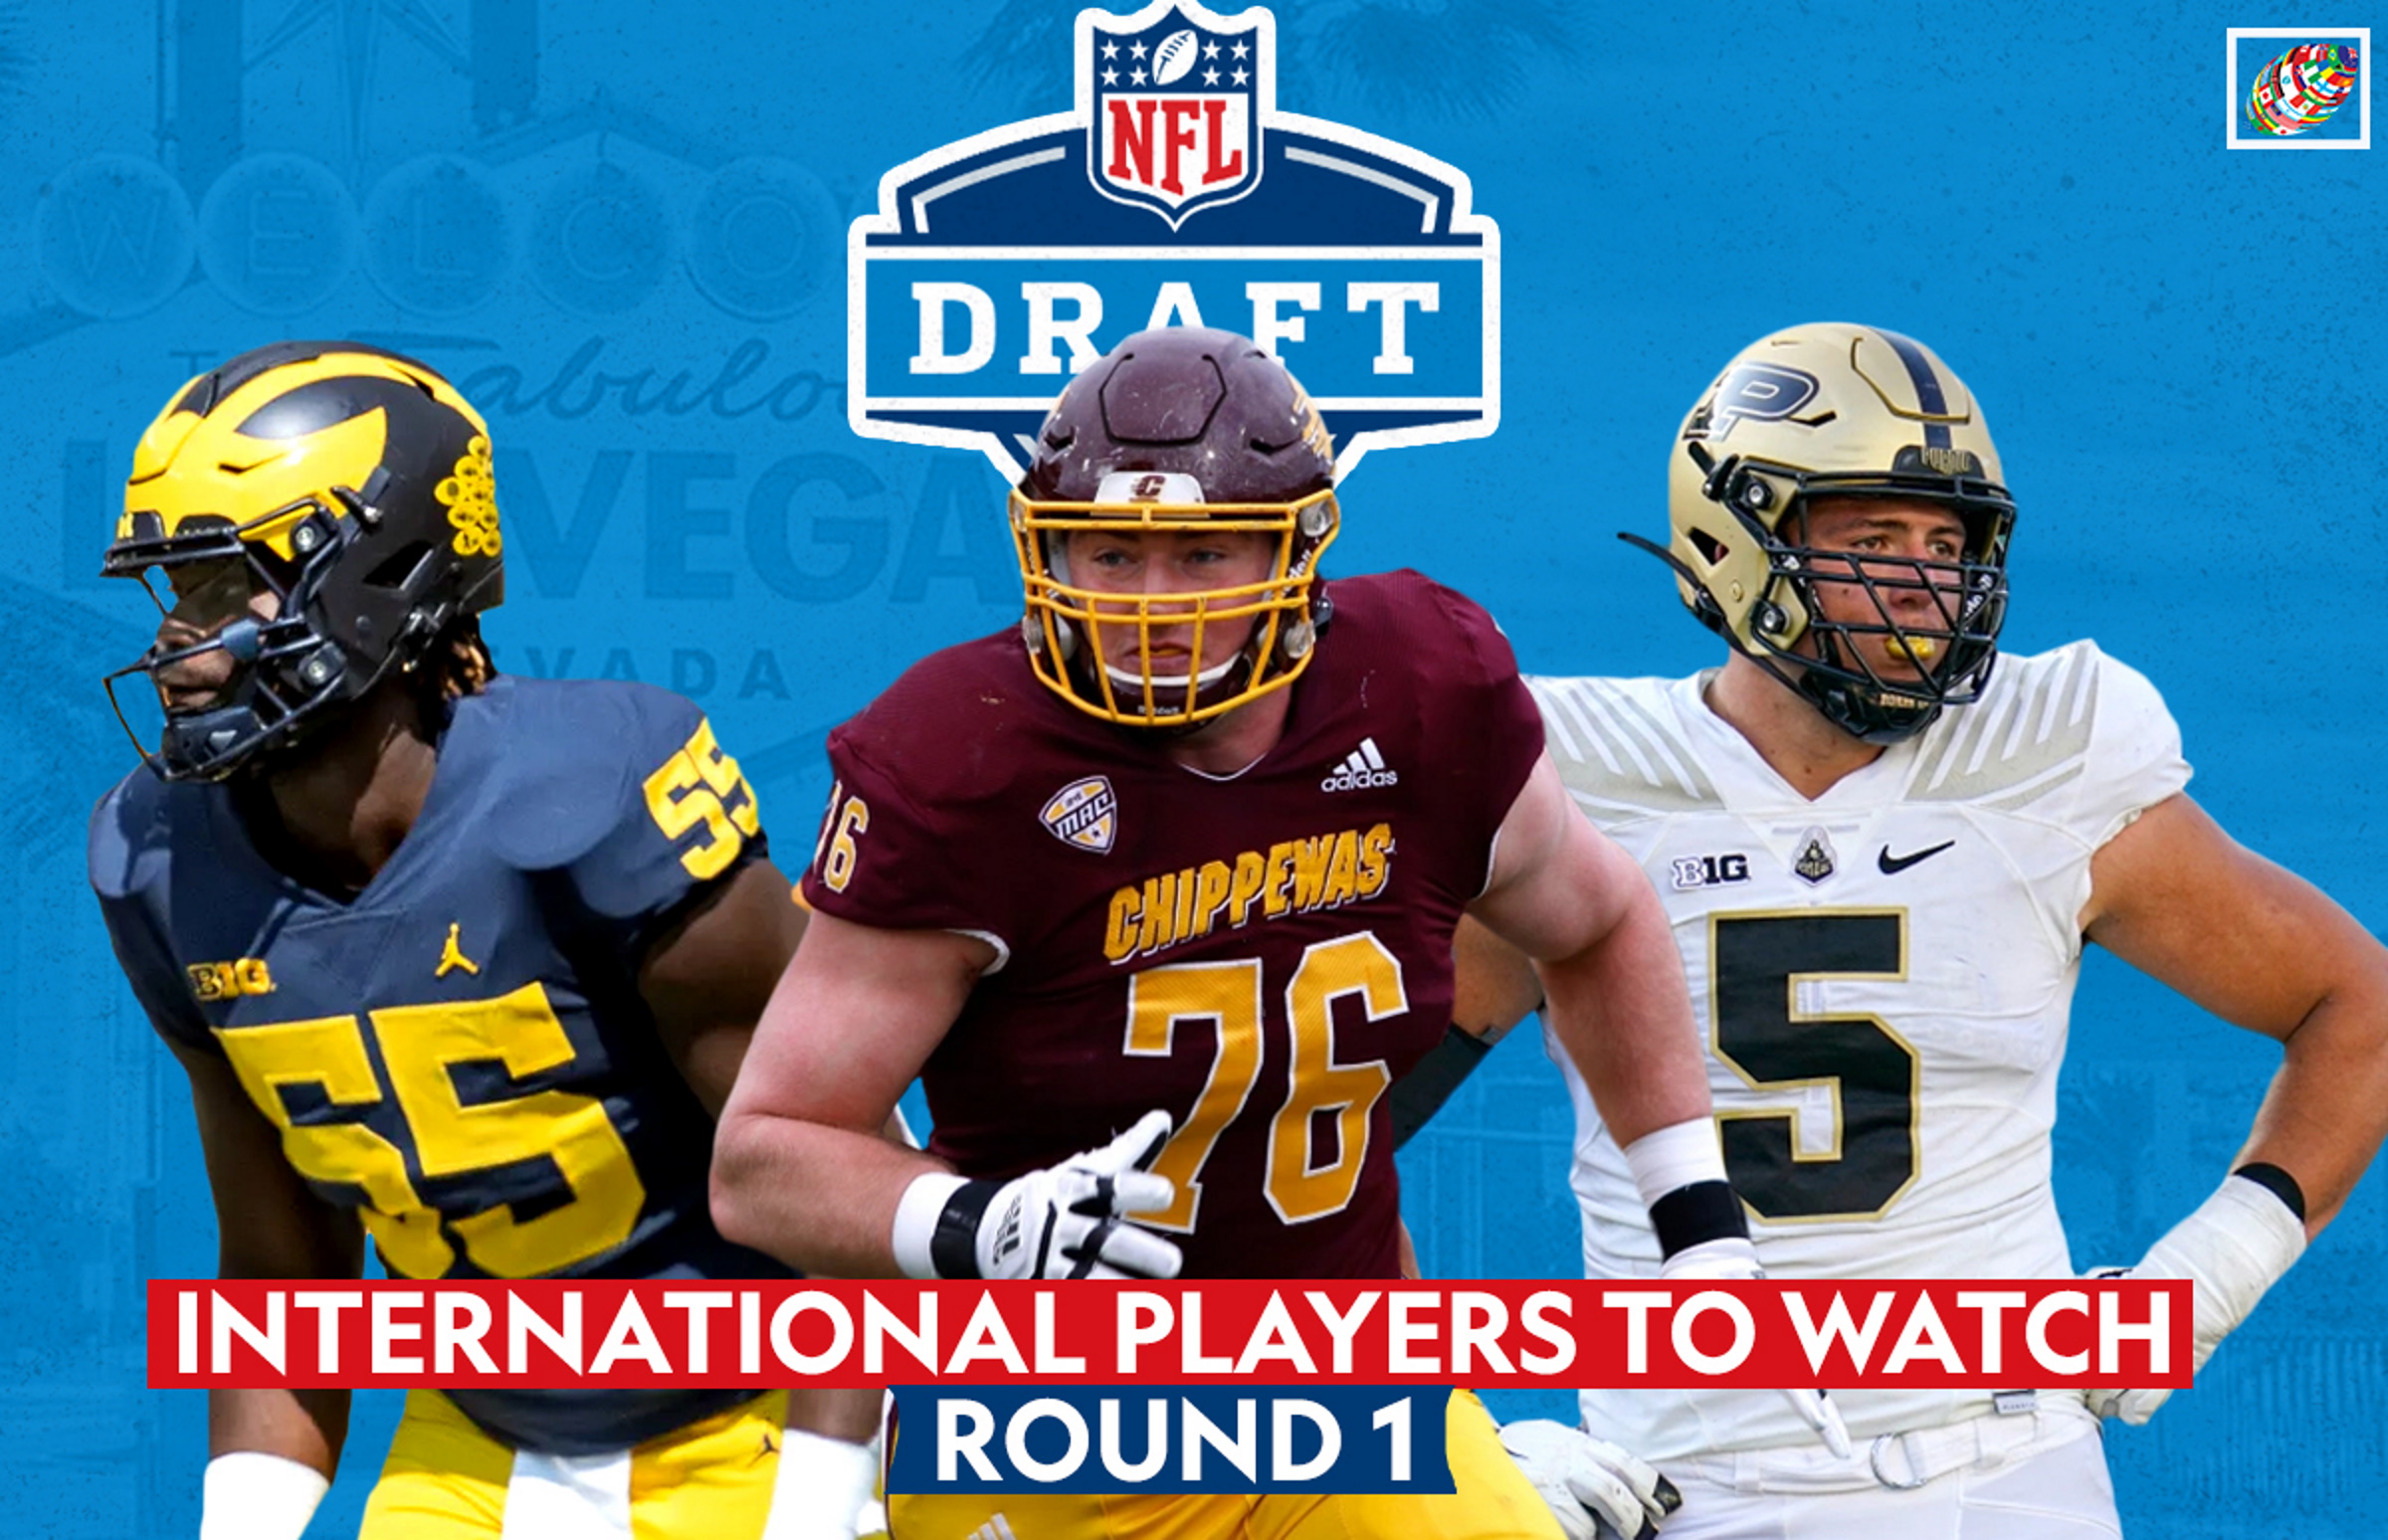 NFL Draft 2022: Best international players to watch in historic Round 1